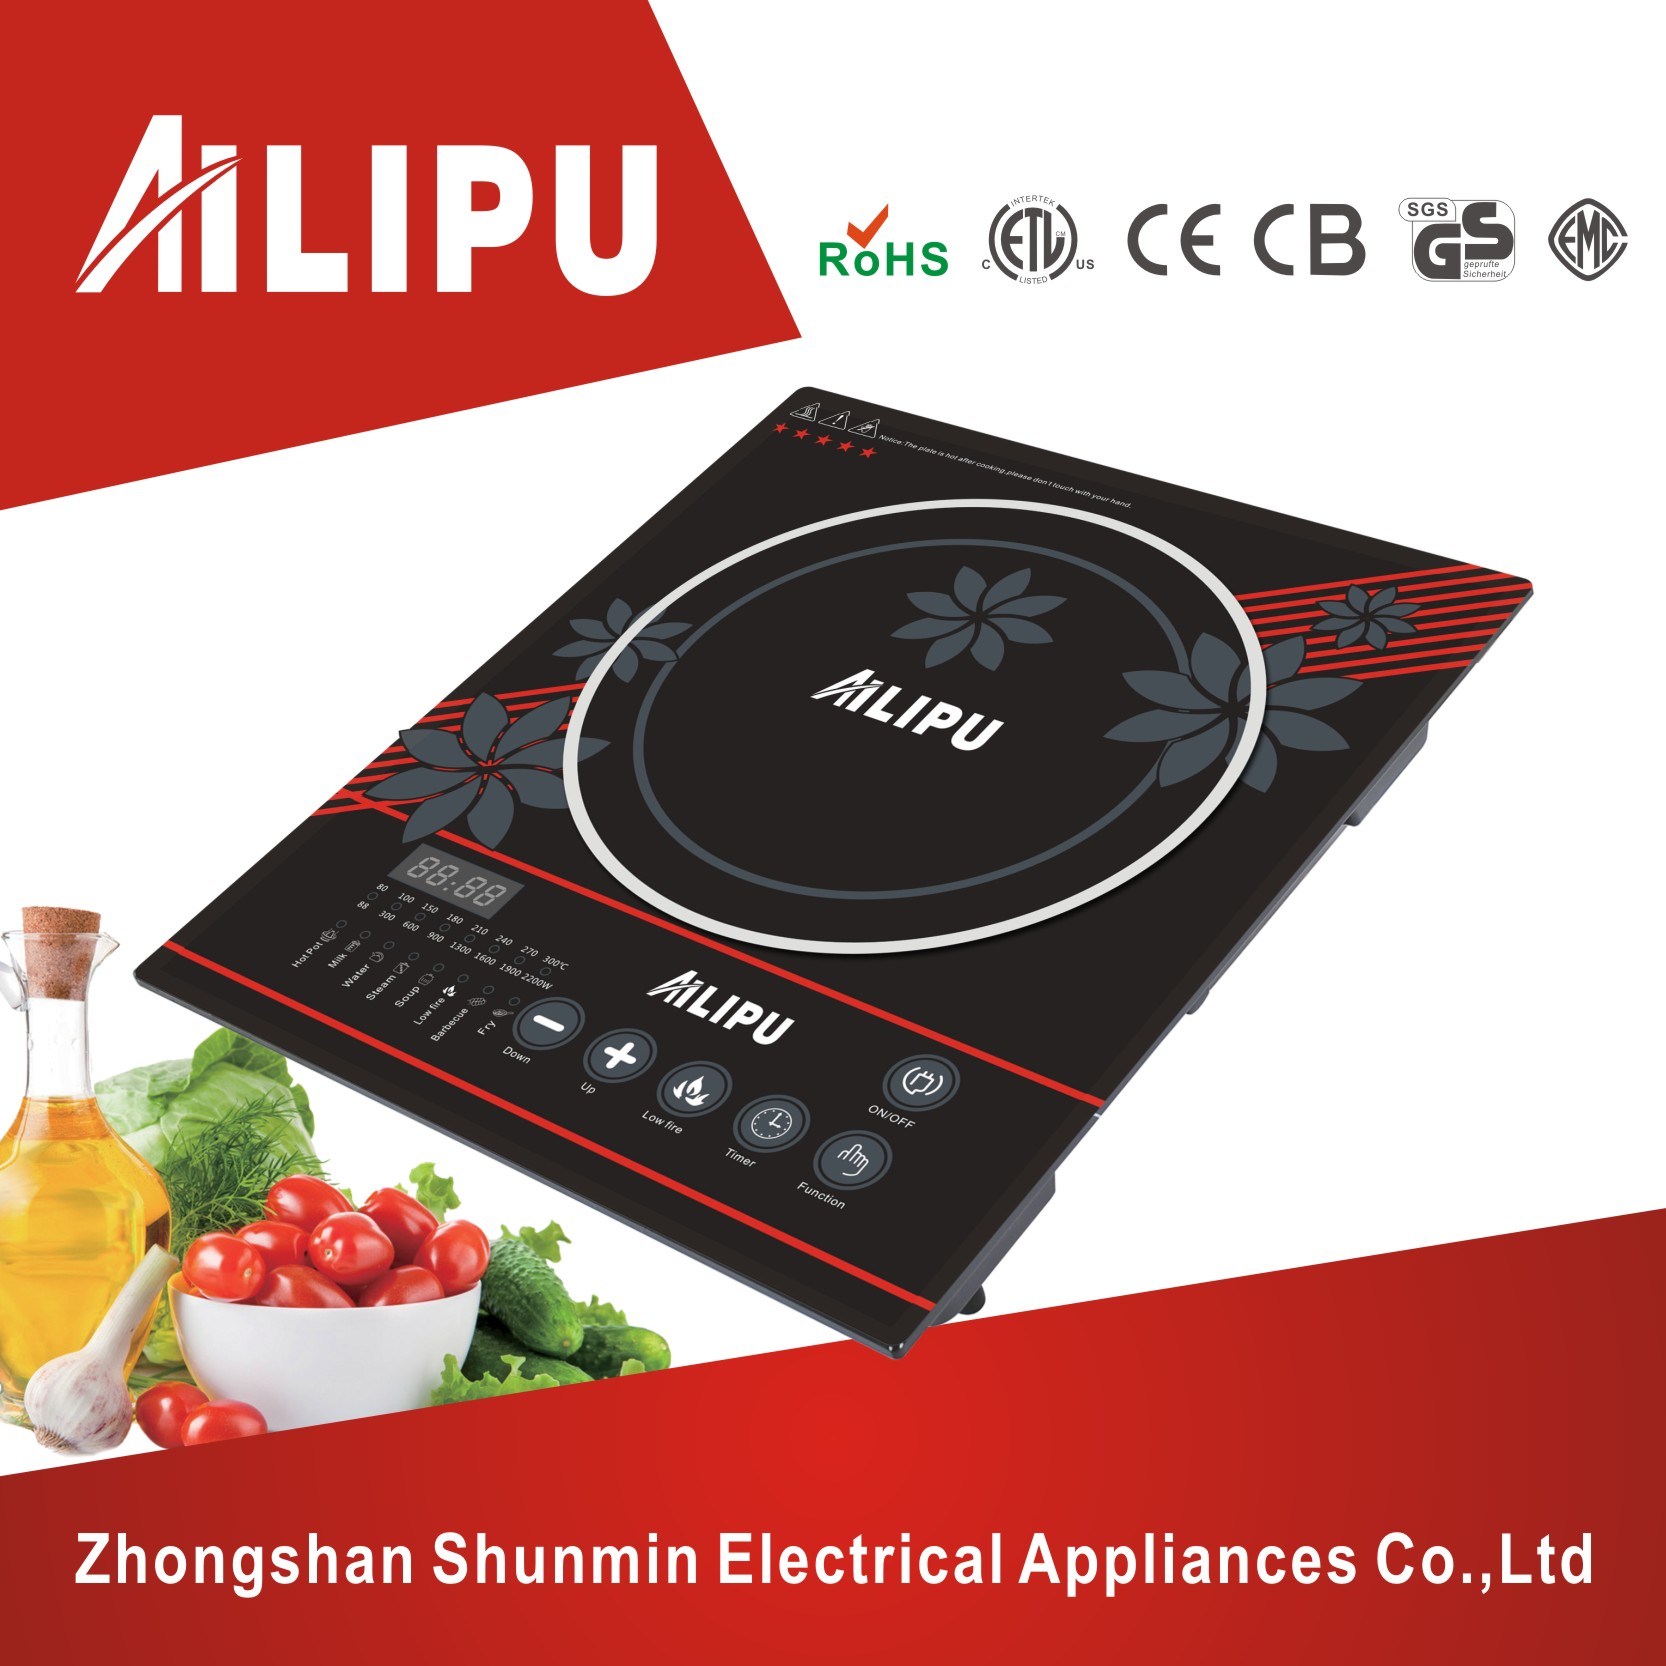 Ailipu Brand Popular Low Price Induction Cooker, Induction Stove Wok, Electric Cooktop